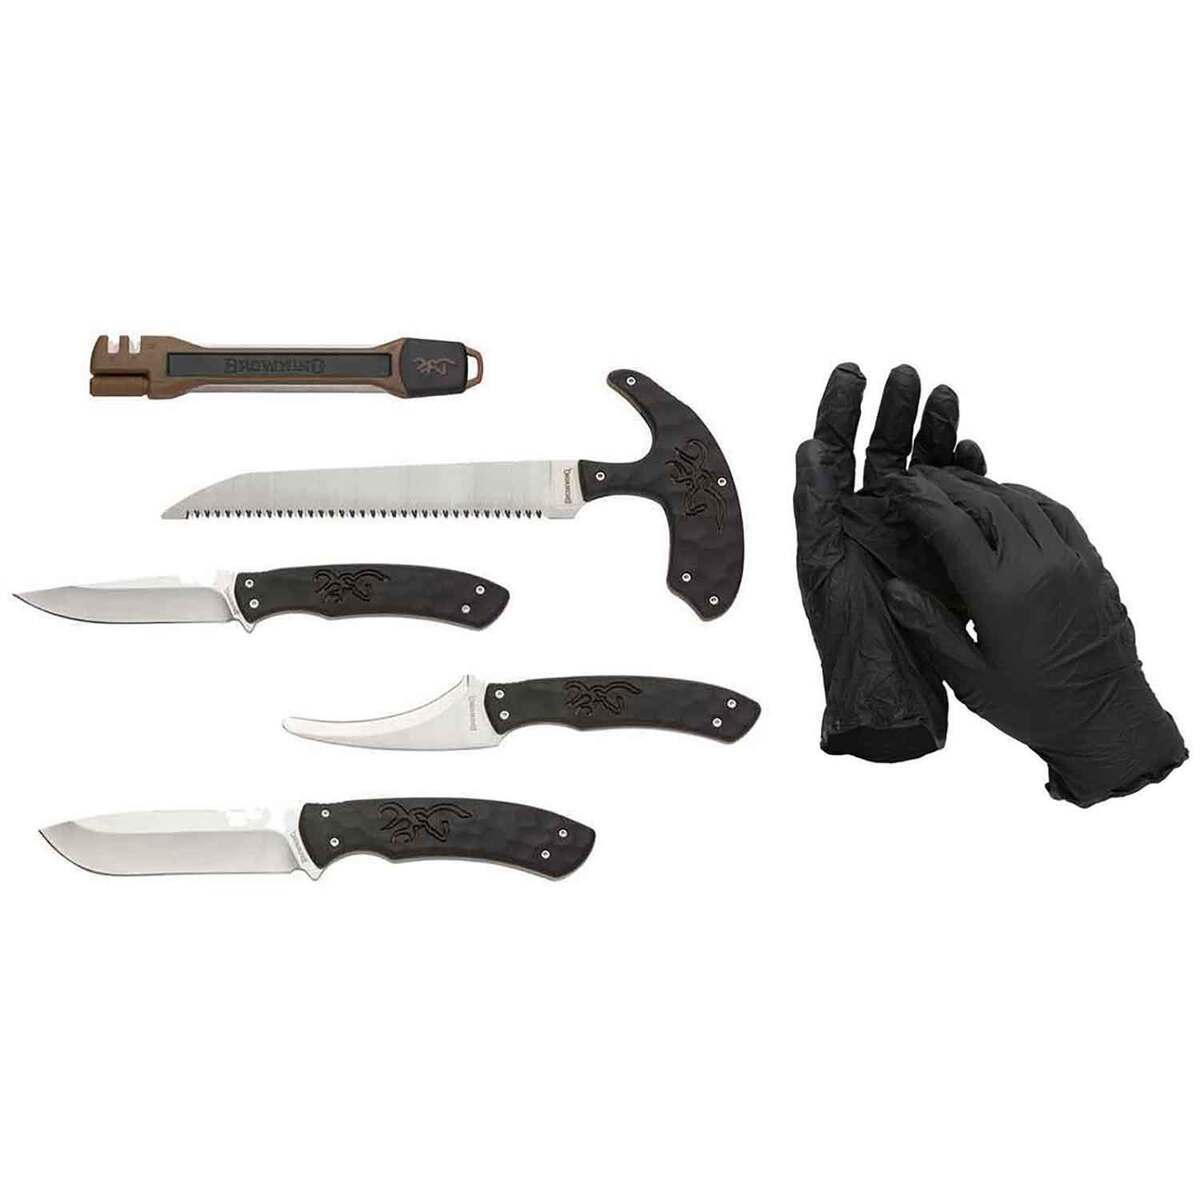 True Primal Forge Knife Kit, Set Includes Two Outdoor Kitchen Prep and Carving Knives, 6.5 Chopper and 7.25 Tanto Conveniently Stored in A Waxed